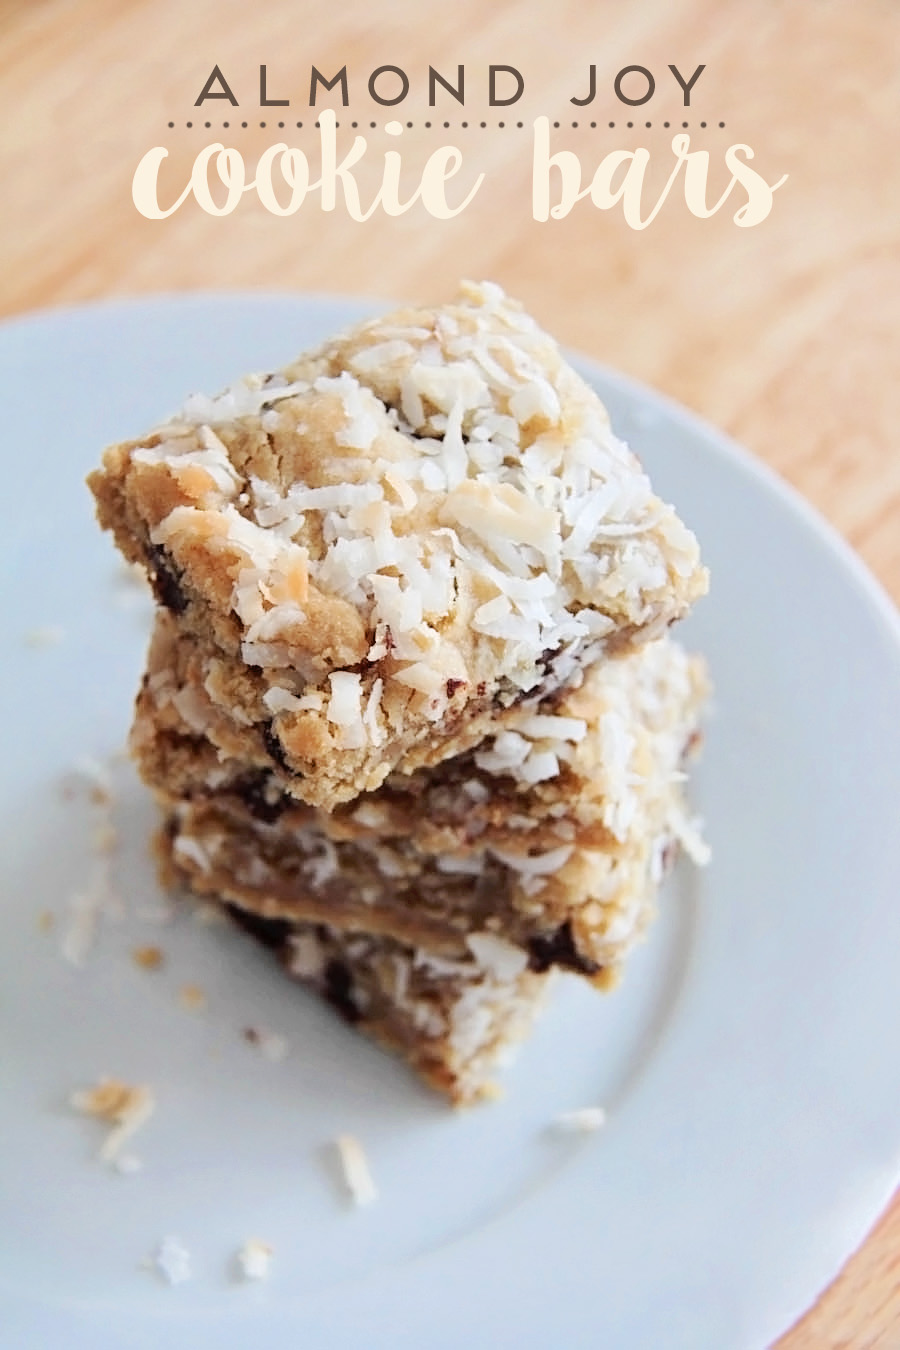 These almond joy cookie bars are loaded with coconut, chocolate chips, and almonds, all packed into a soft and buttery cookie base. So delicious!